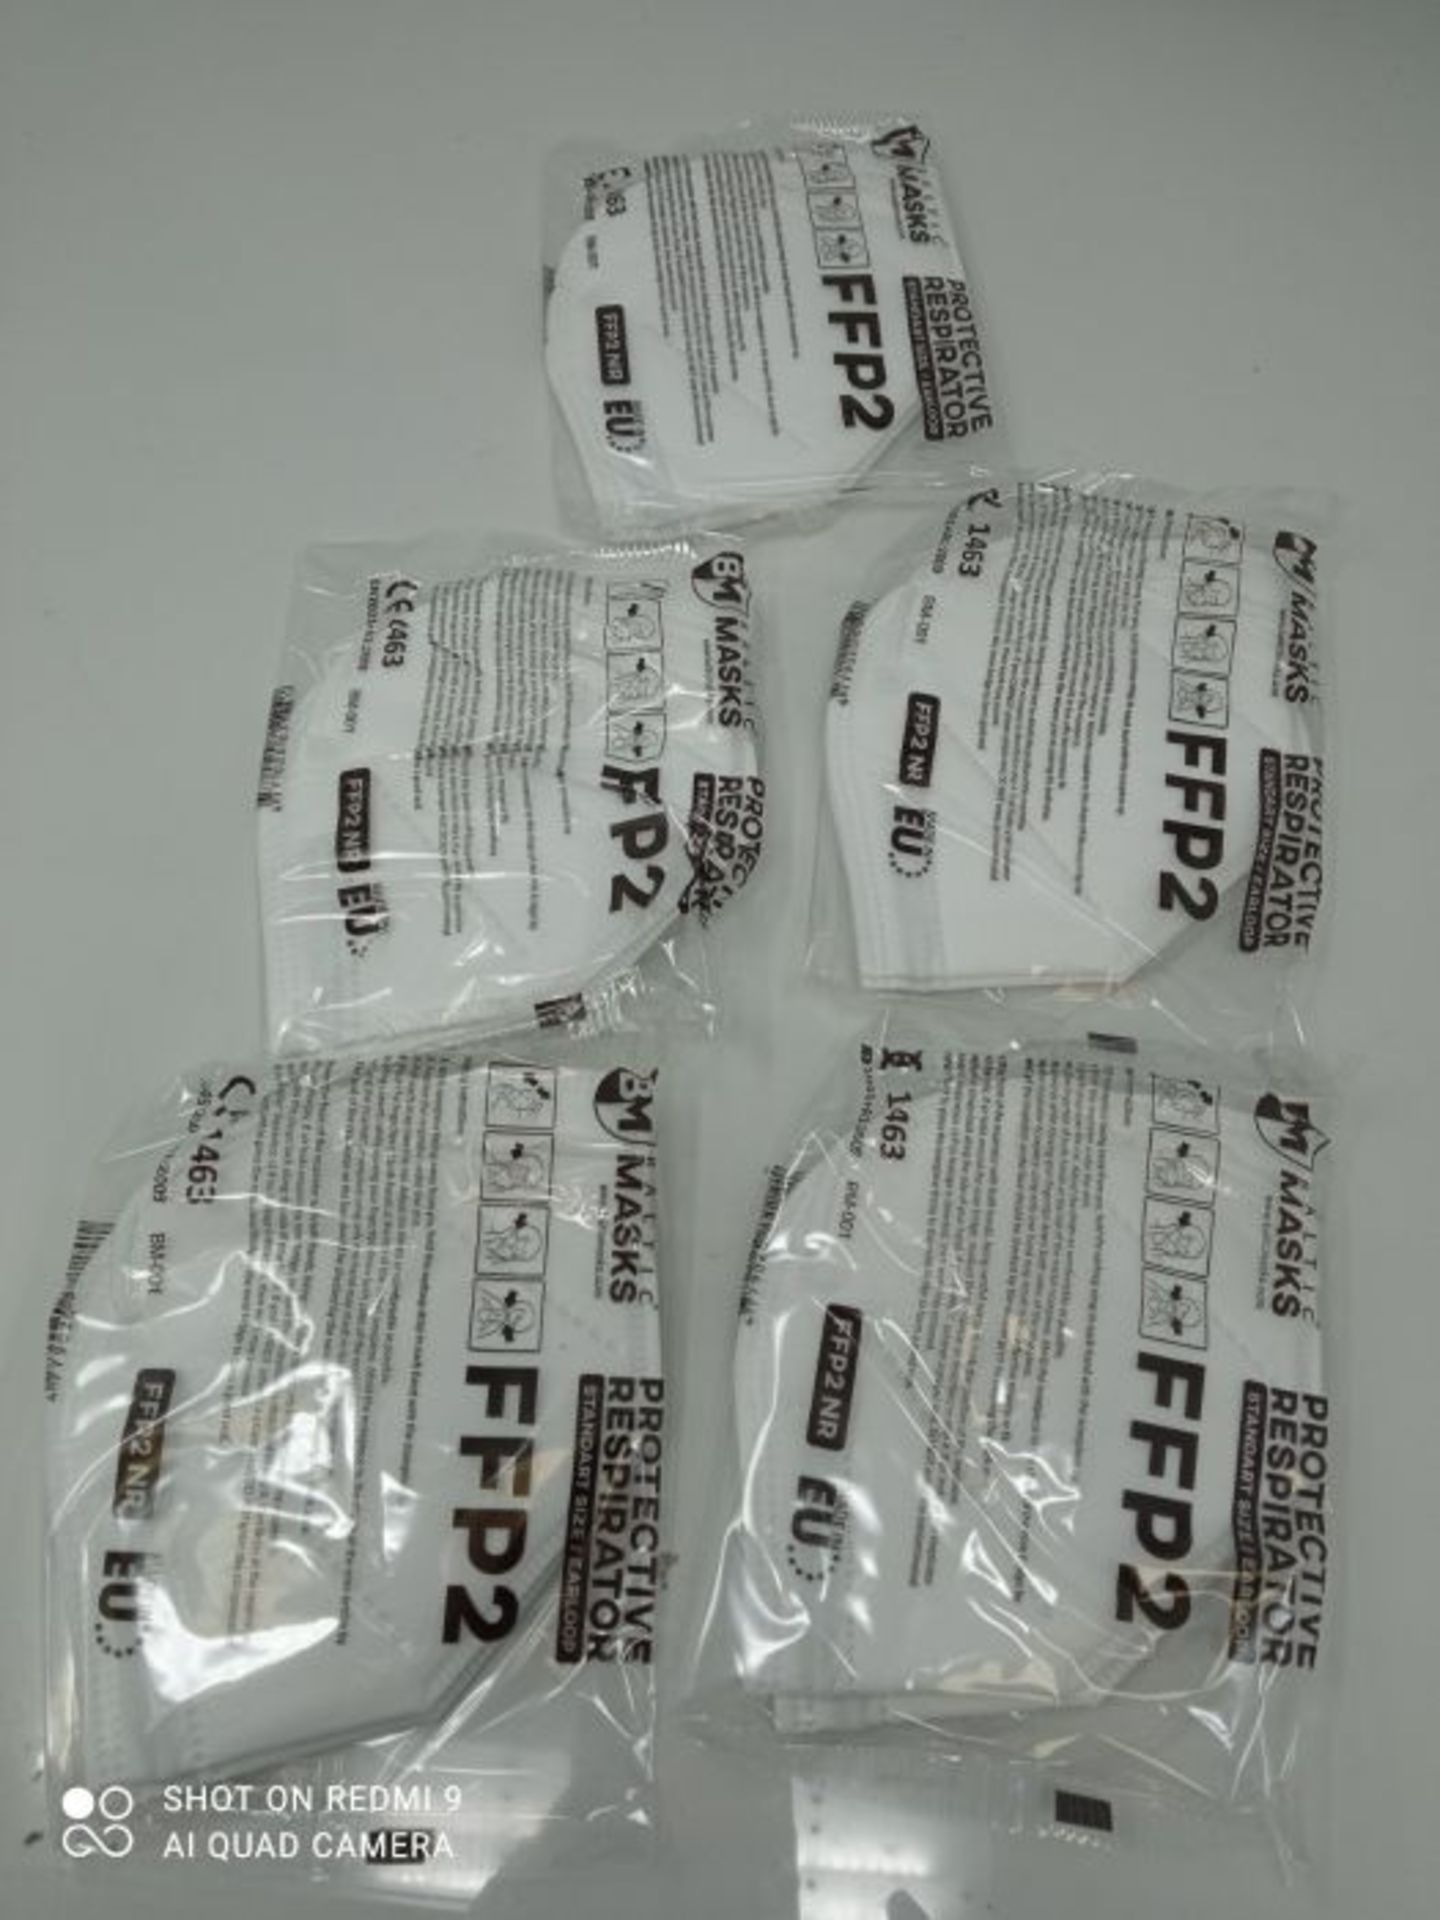 [INCOMPLETE] Baltic Masks FFP2 Disposable Respirator Protective Face Mask 5 Layer Filt - Image 2 of 3